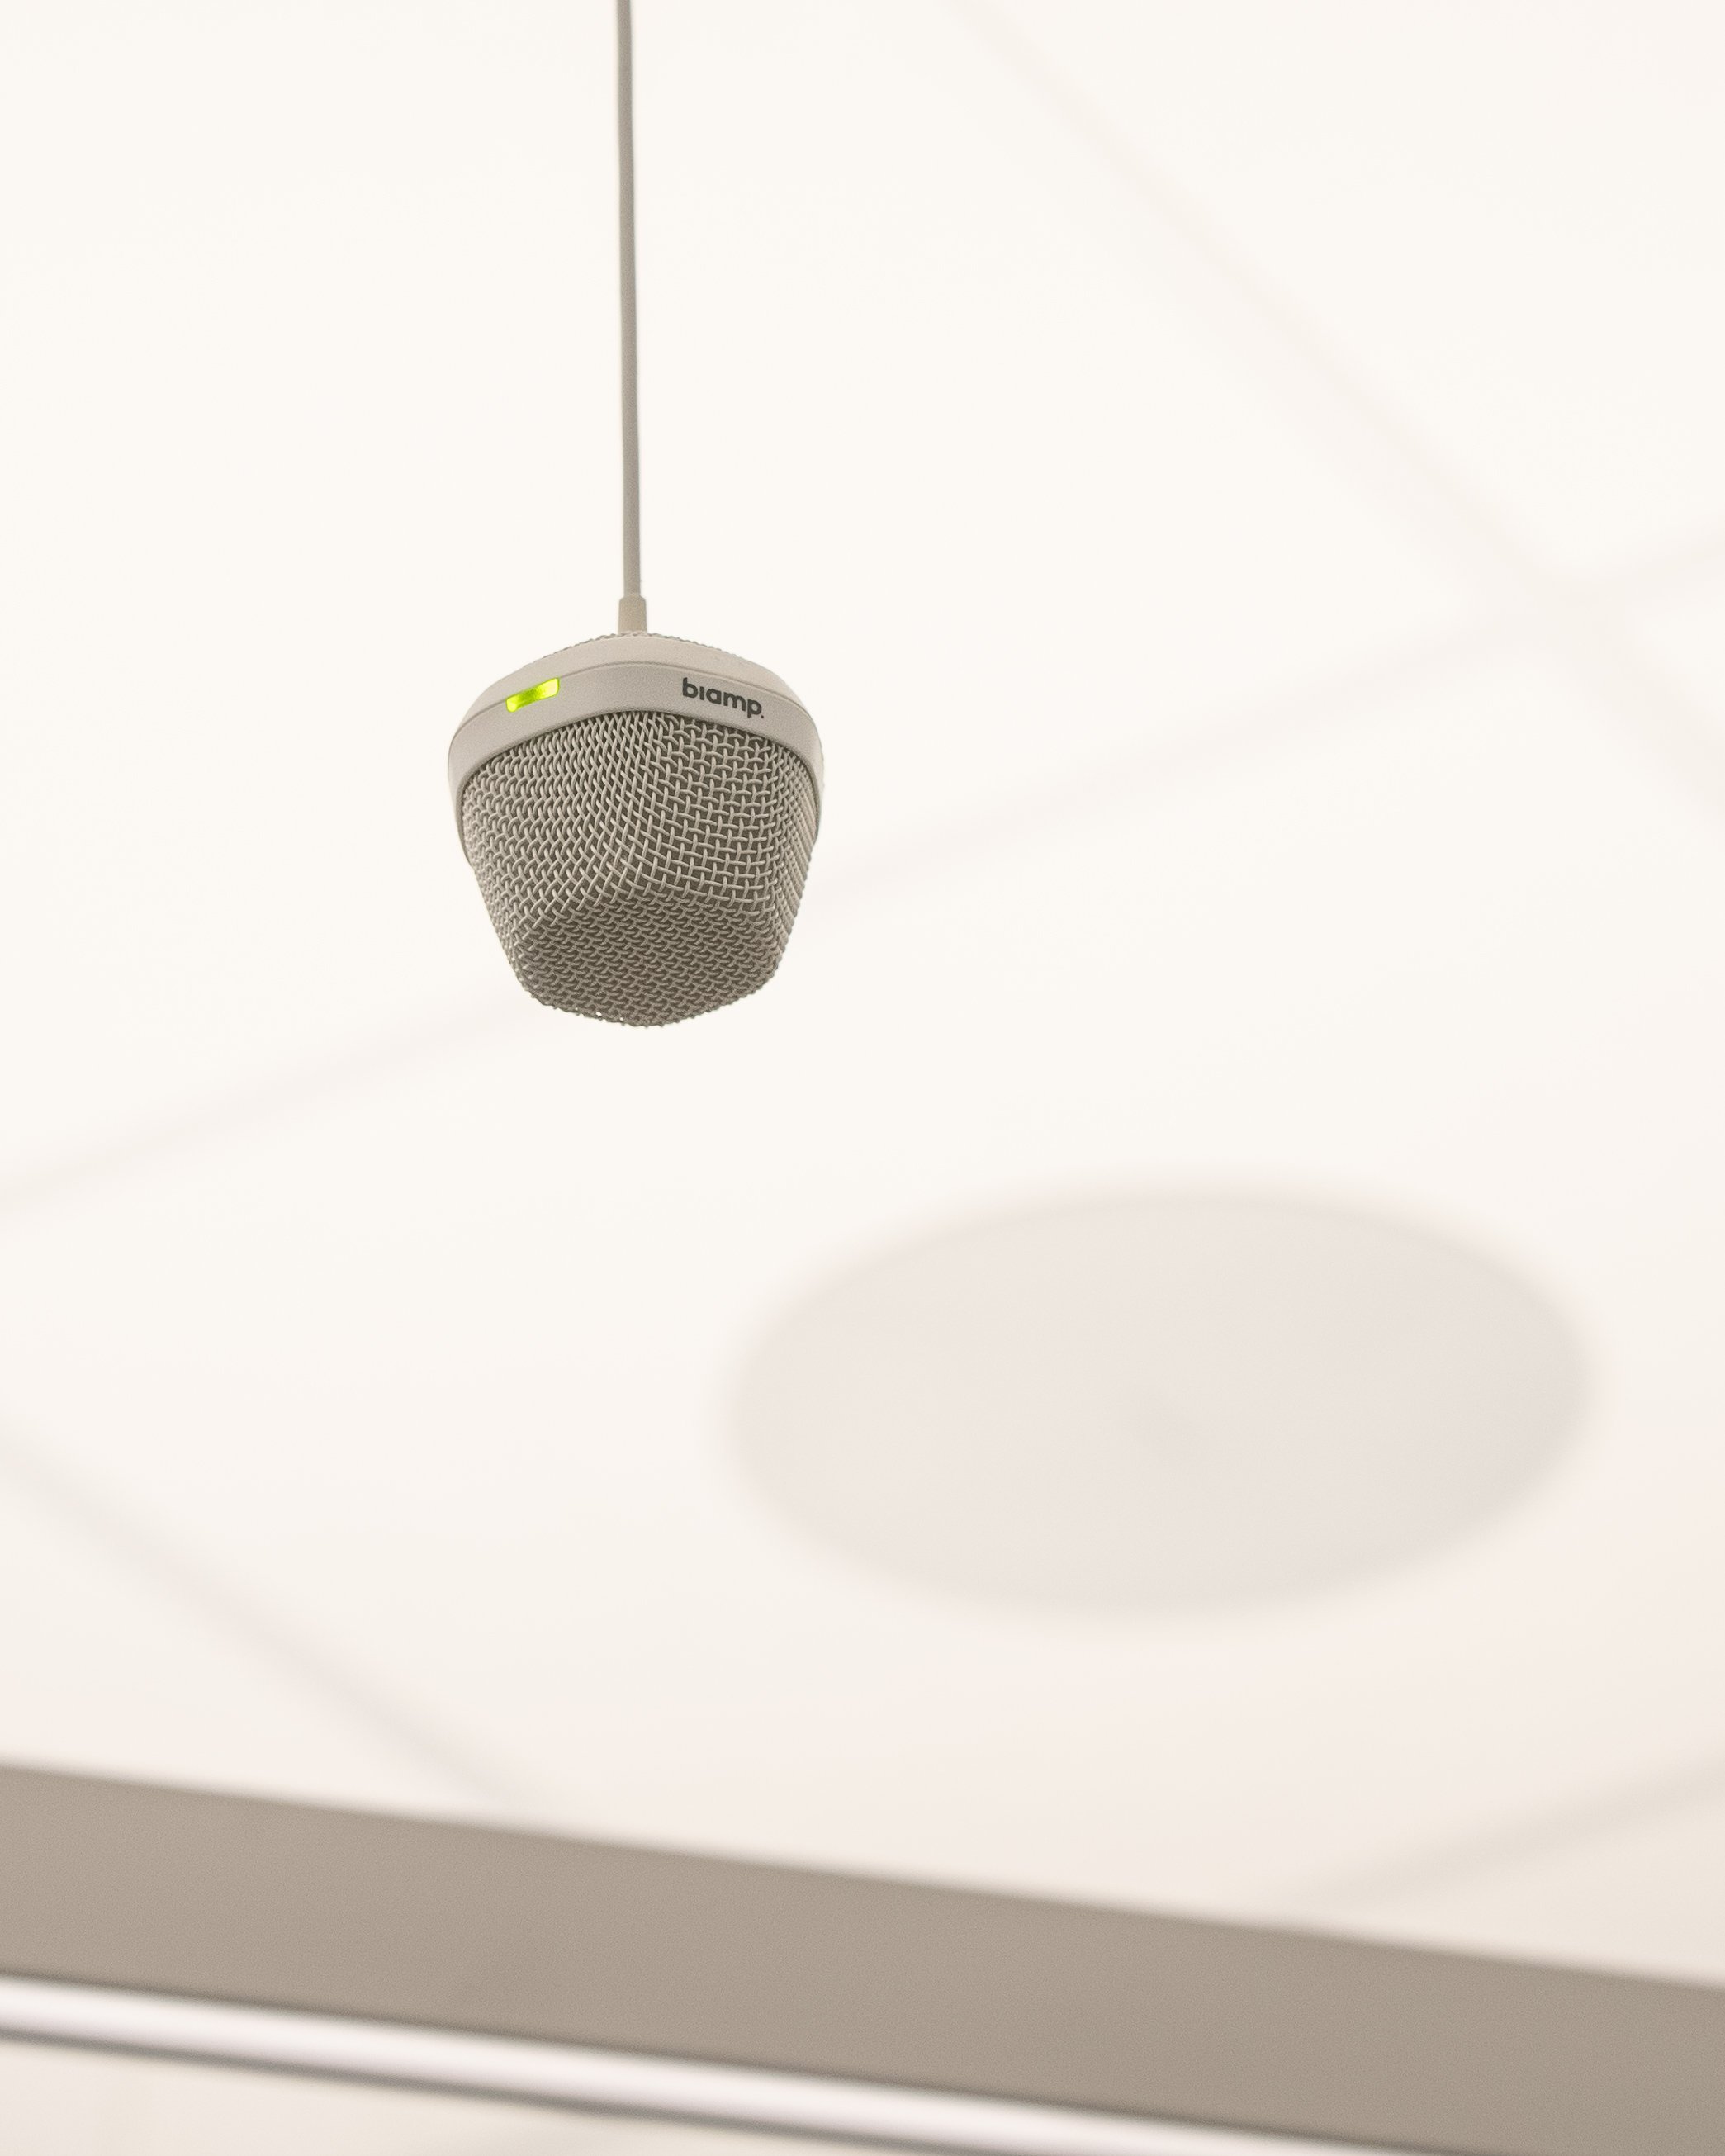  A ceiling mounted Biamp microphone.  